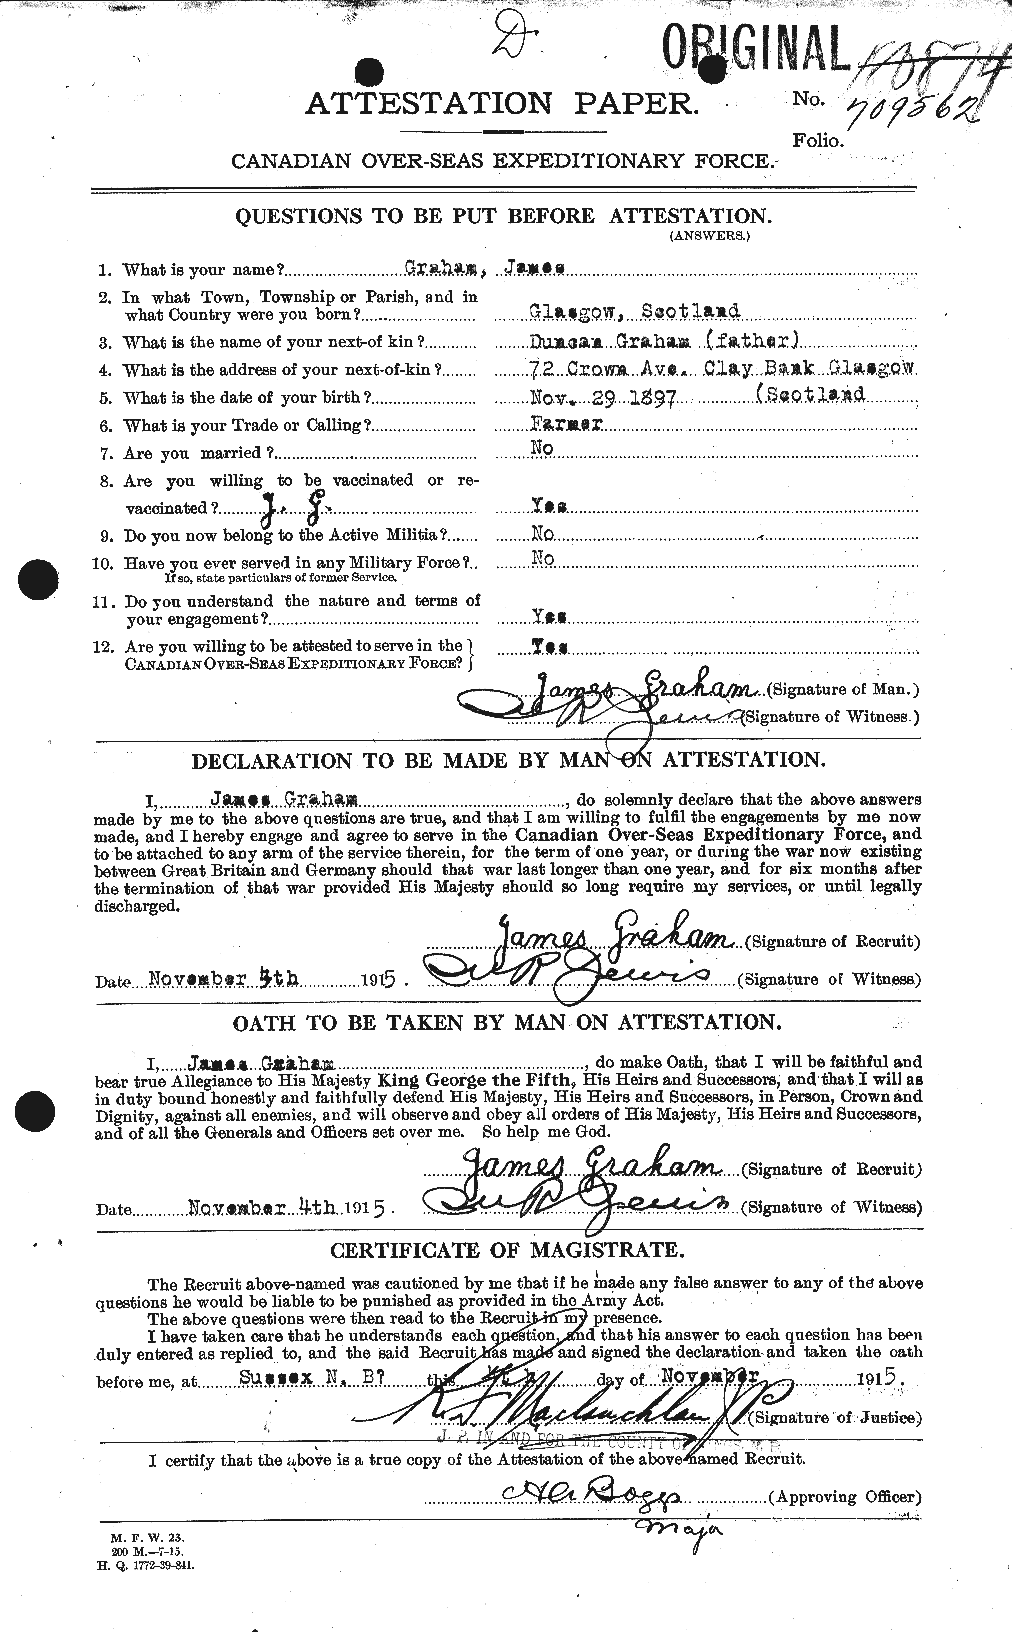 Personnel Records of the First World War - CEF 357777a